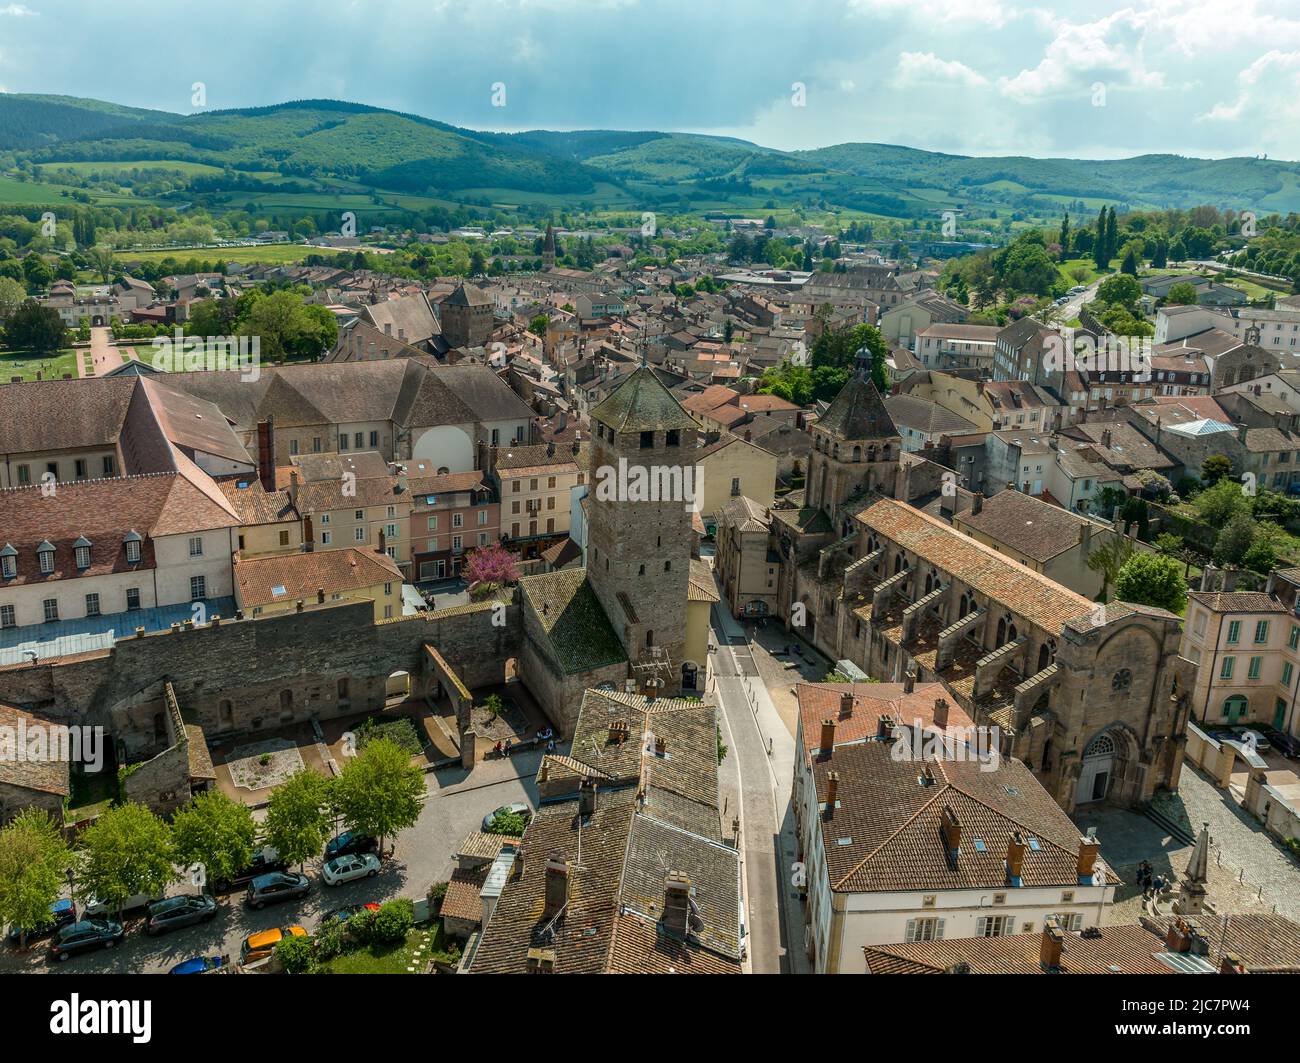 erial view of the Cluny Abbey a former Benedictine monastery in Romanesque architectural style in Cluny, Saône-et-Loire, France dedicated to Saint Pet Stock Photo